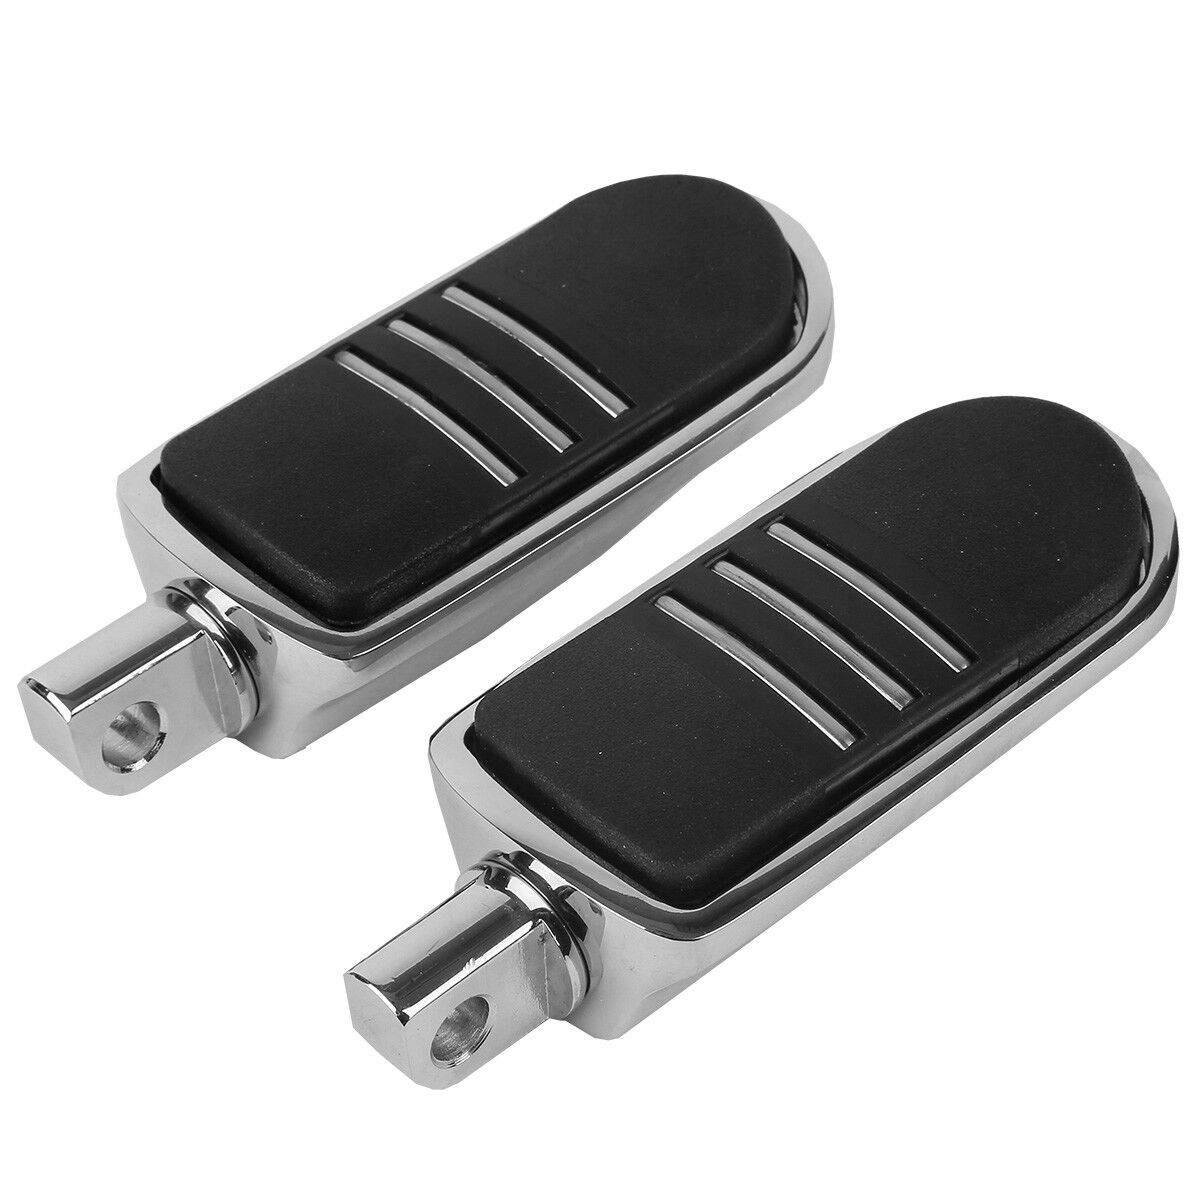 Pegstreamliner Foot pegs Footrest Fit For Harley Touring Softail Dyna Sportster